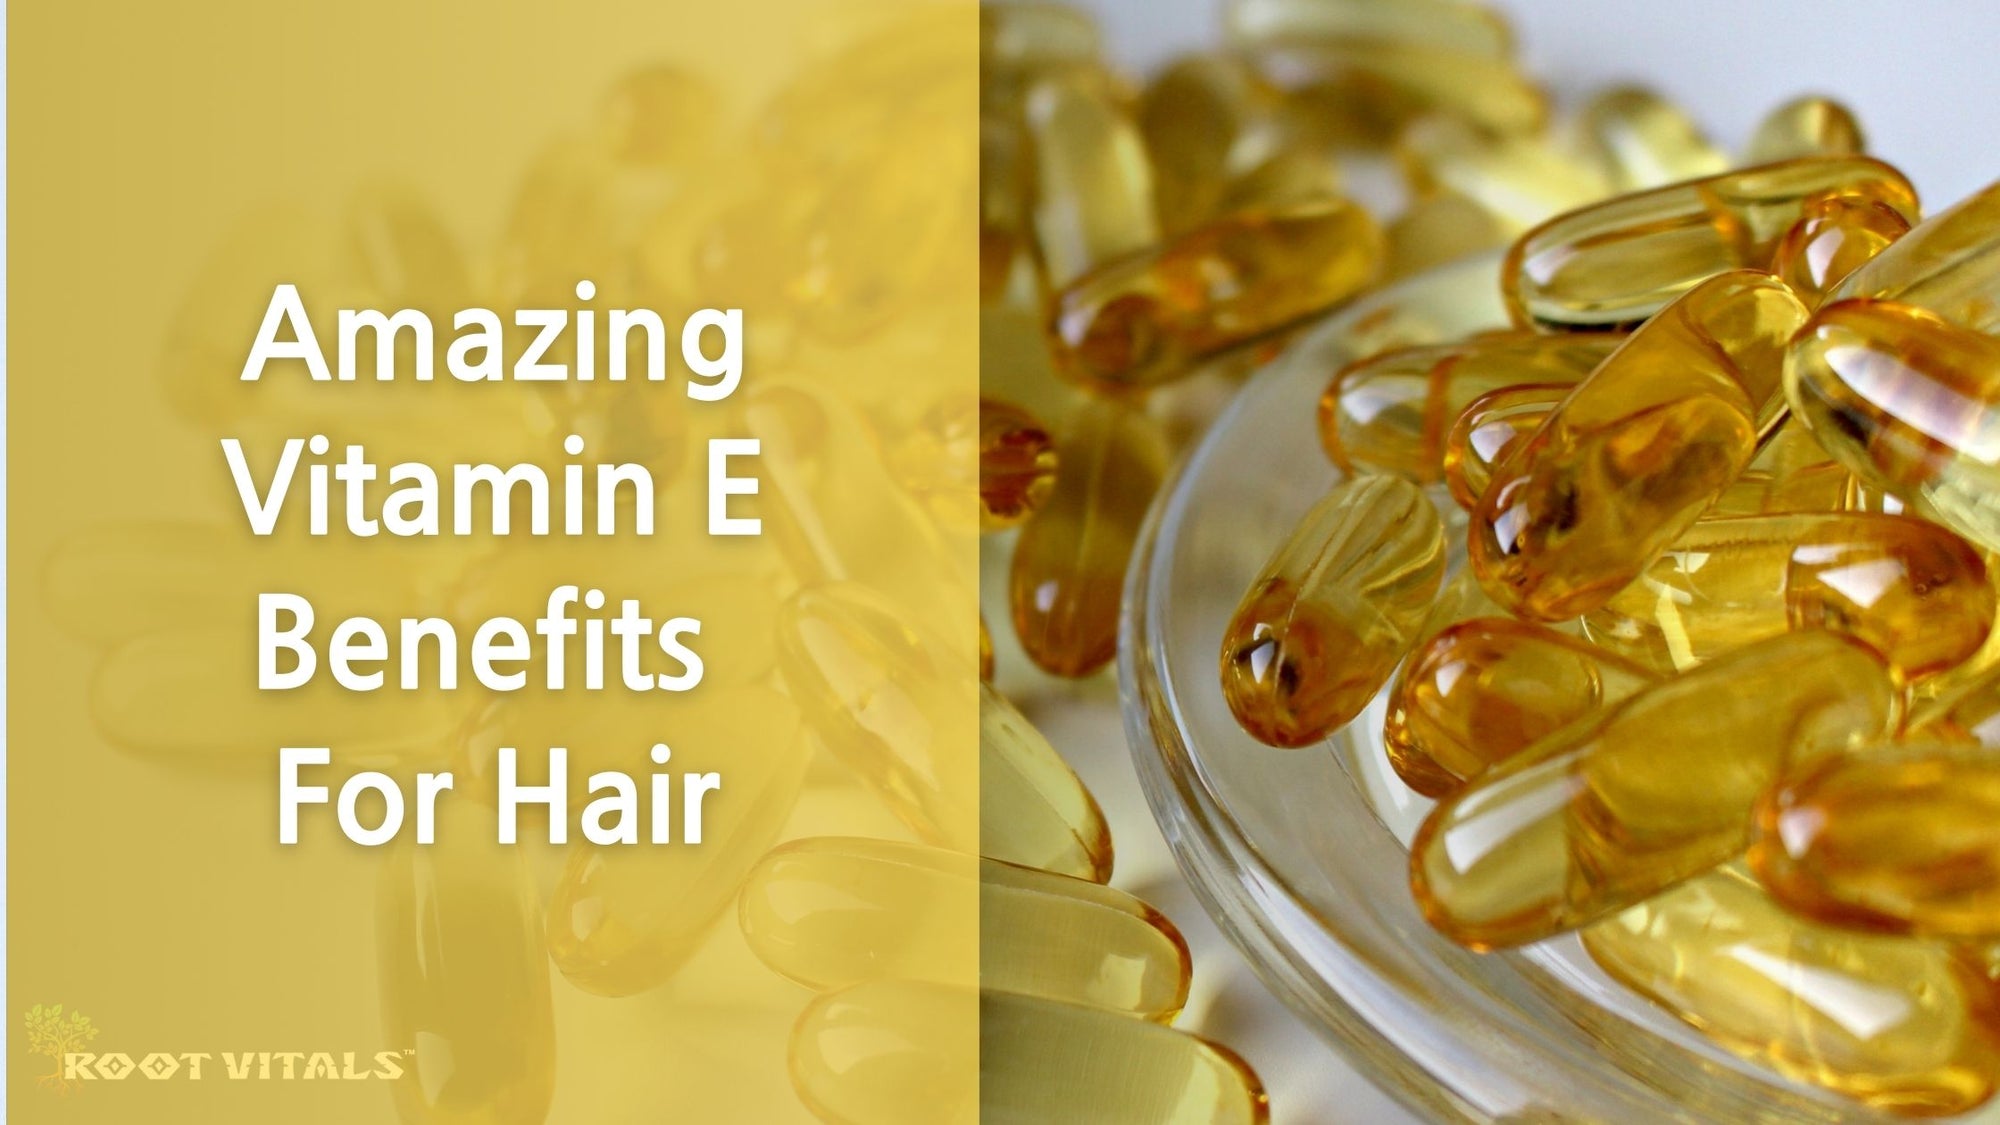 How to prevent hair loss with amazing vitamin E benefits for hair